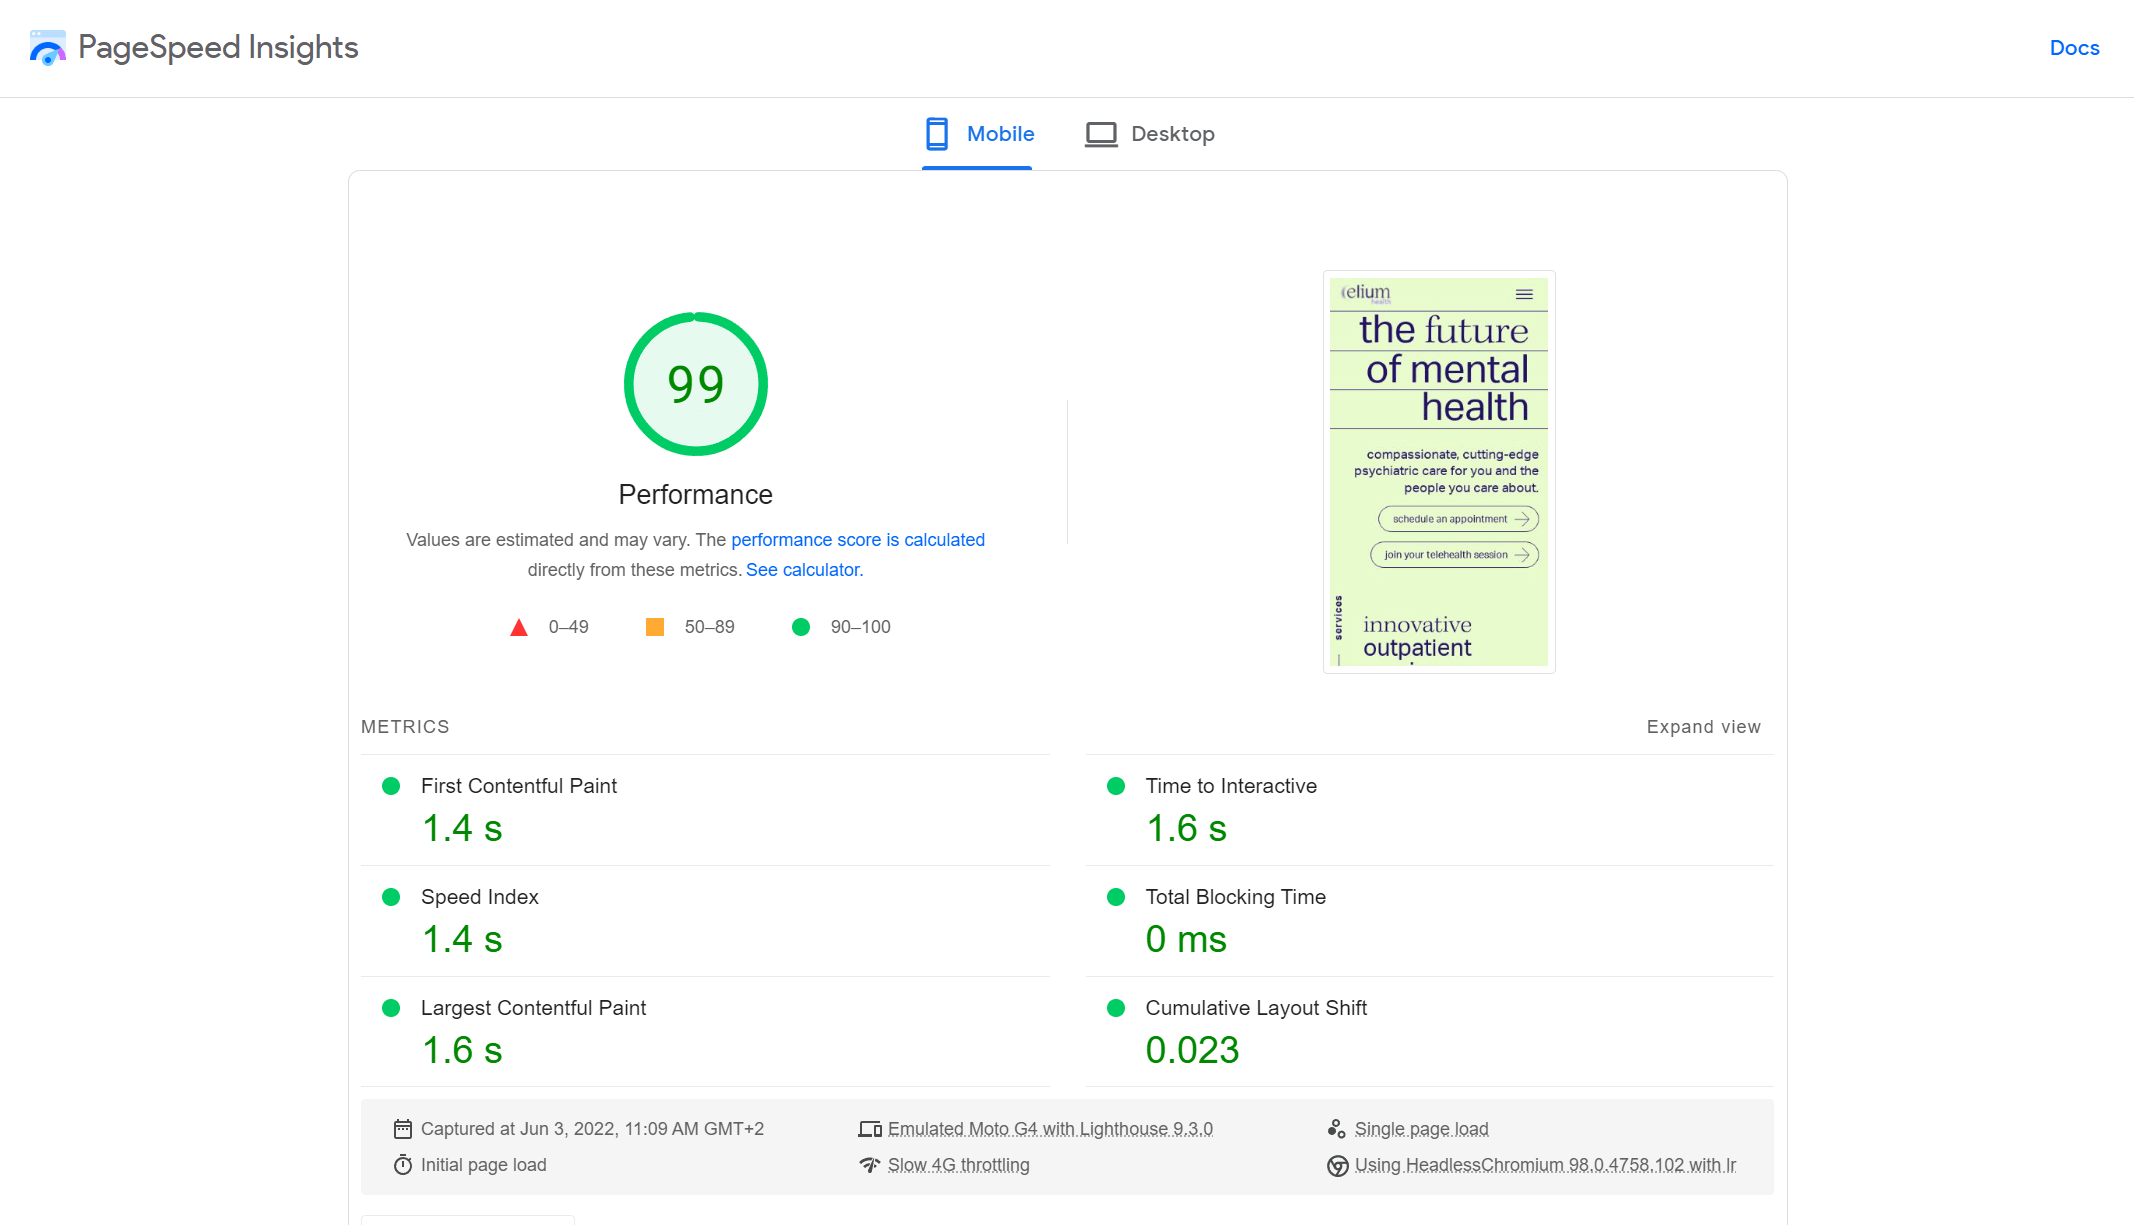 PageSpeed Insights - Mobile results